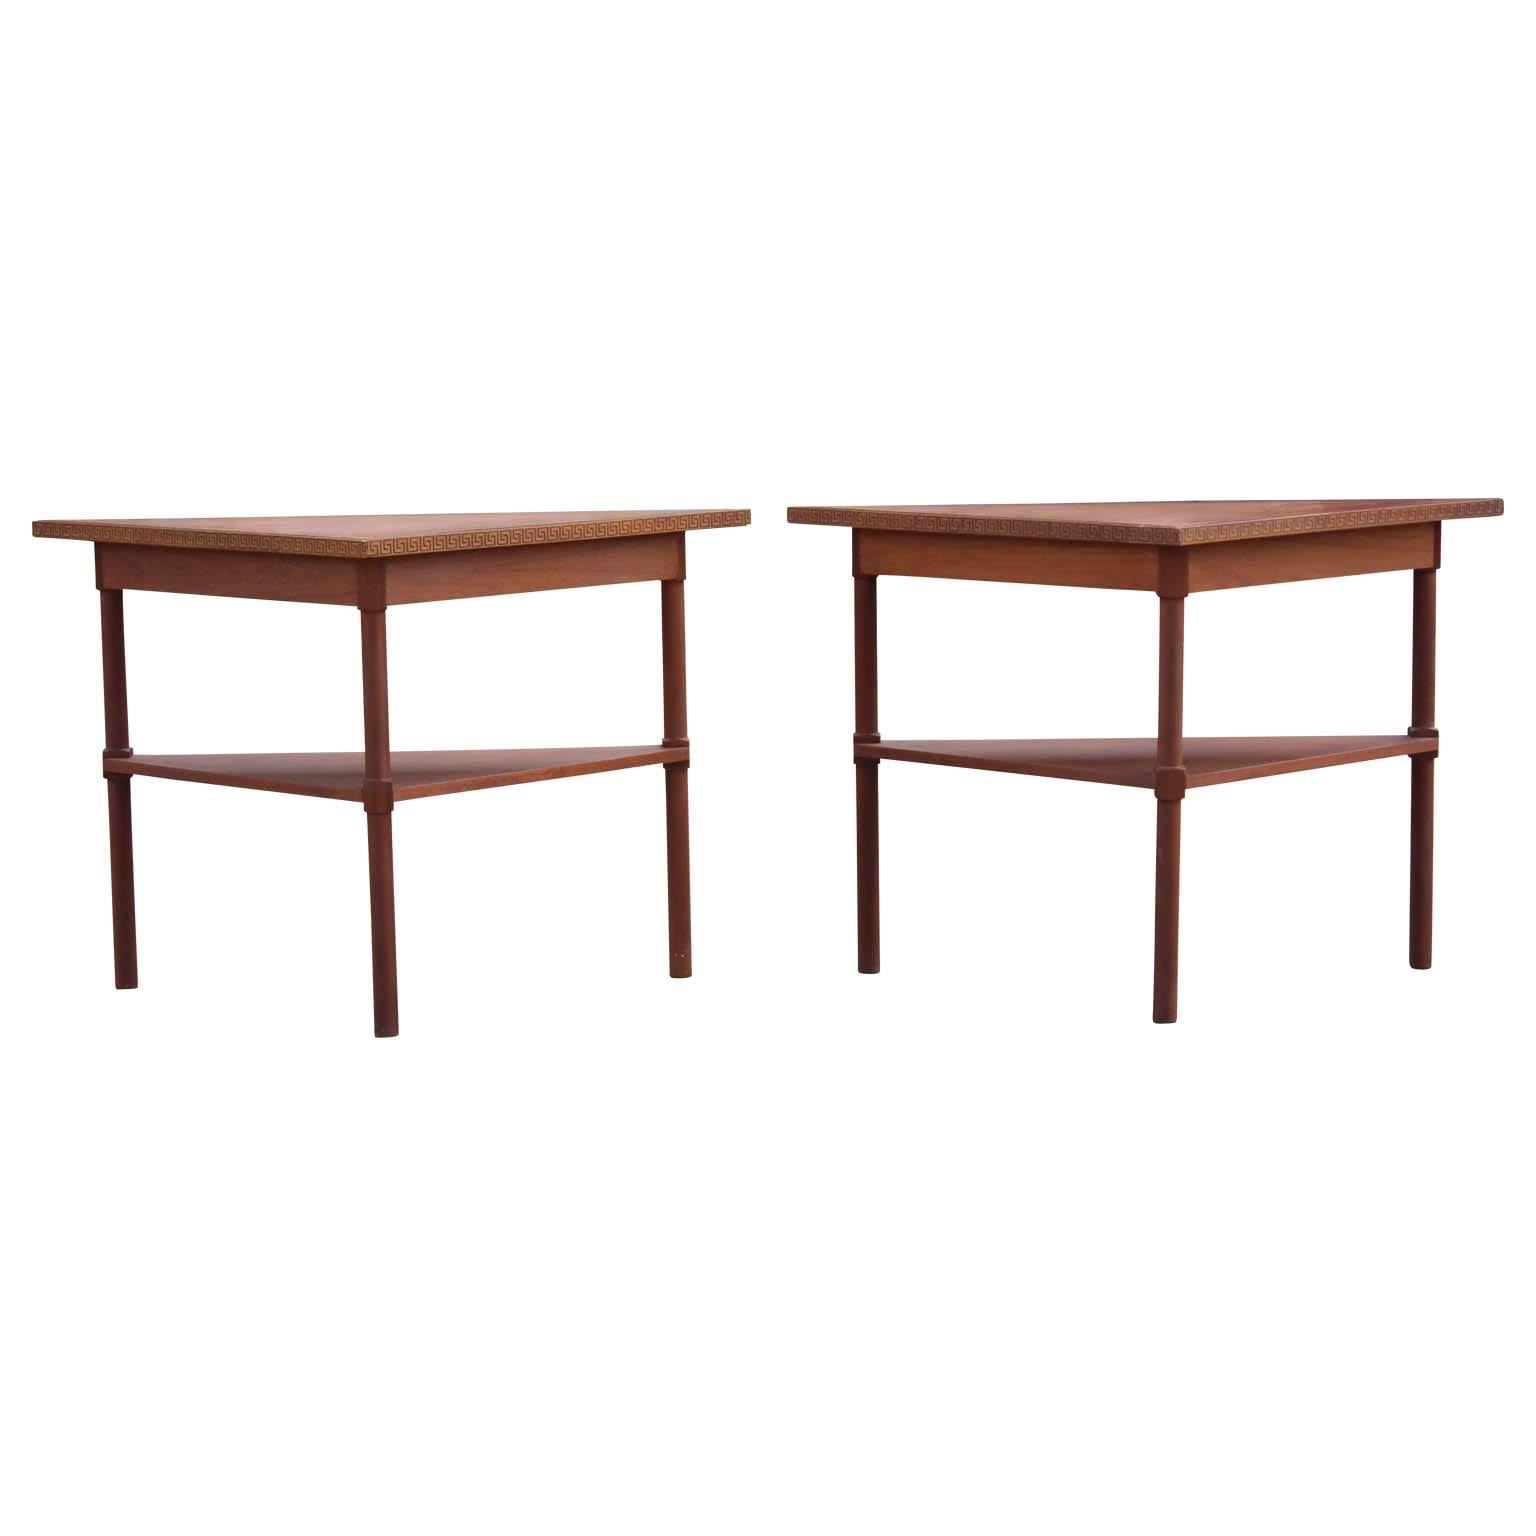 Unique pair of custom-made two-tiered entry way / end tables made from walnut and featuring a carved Greek key patterned trim. Can also be pushed together to make a single table.